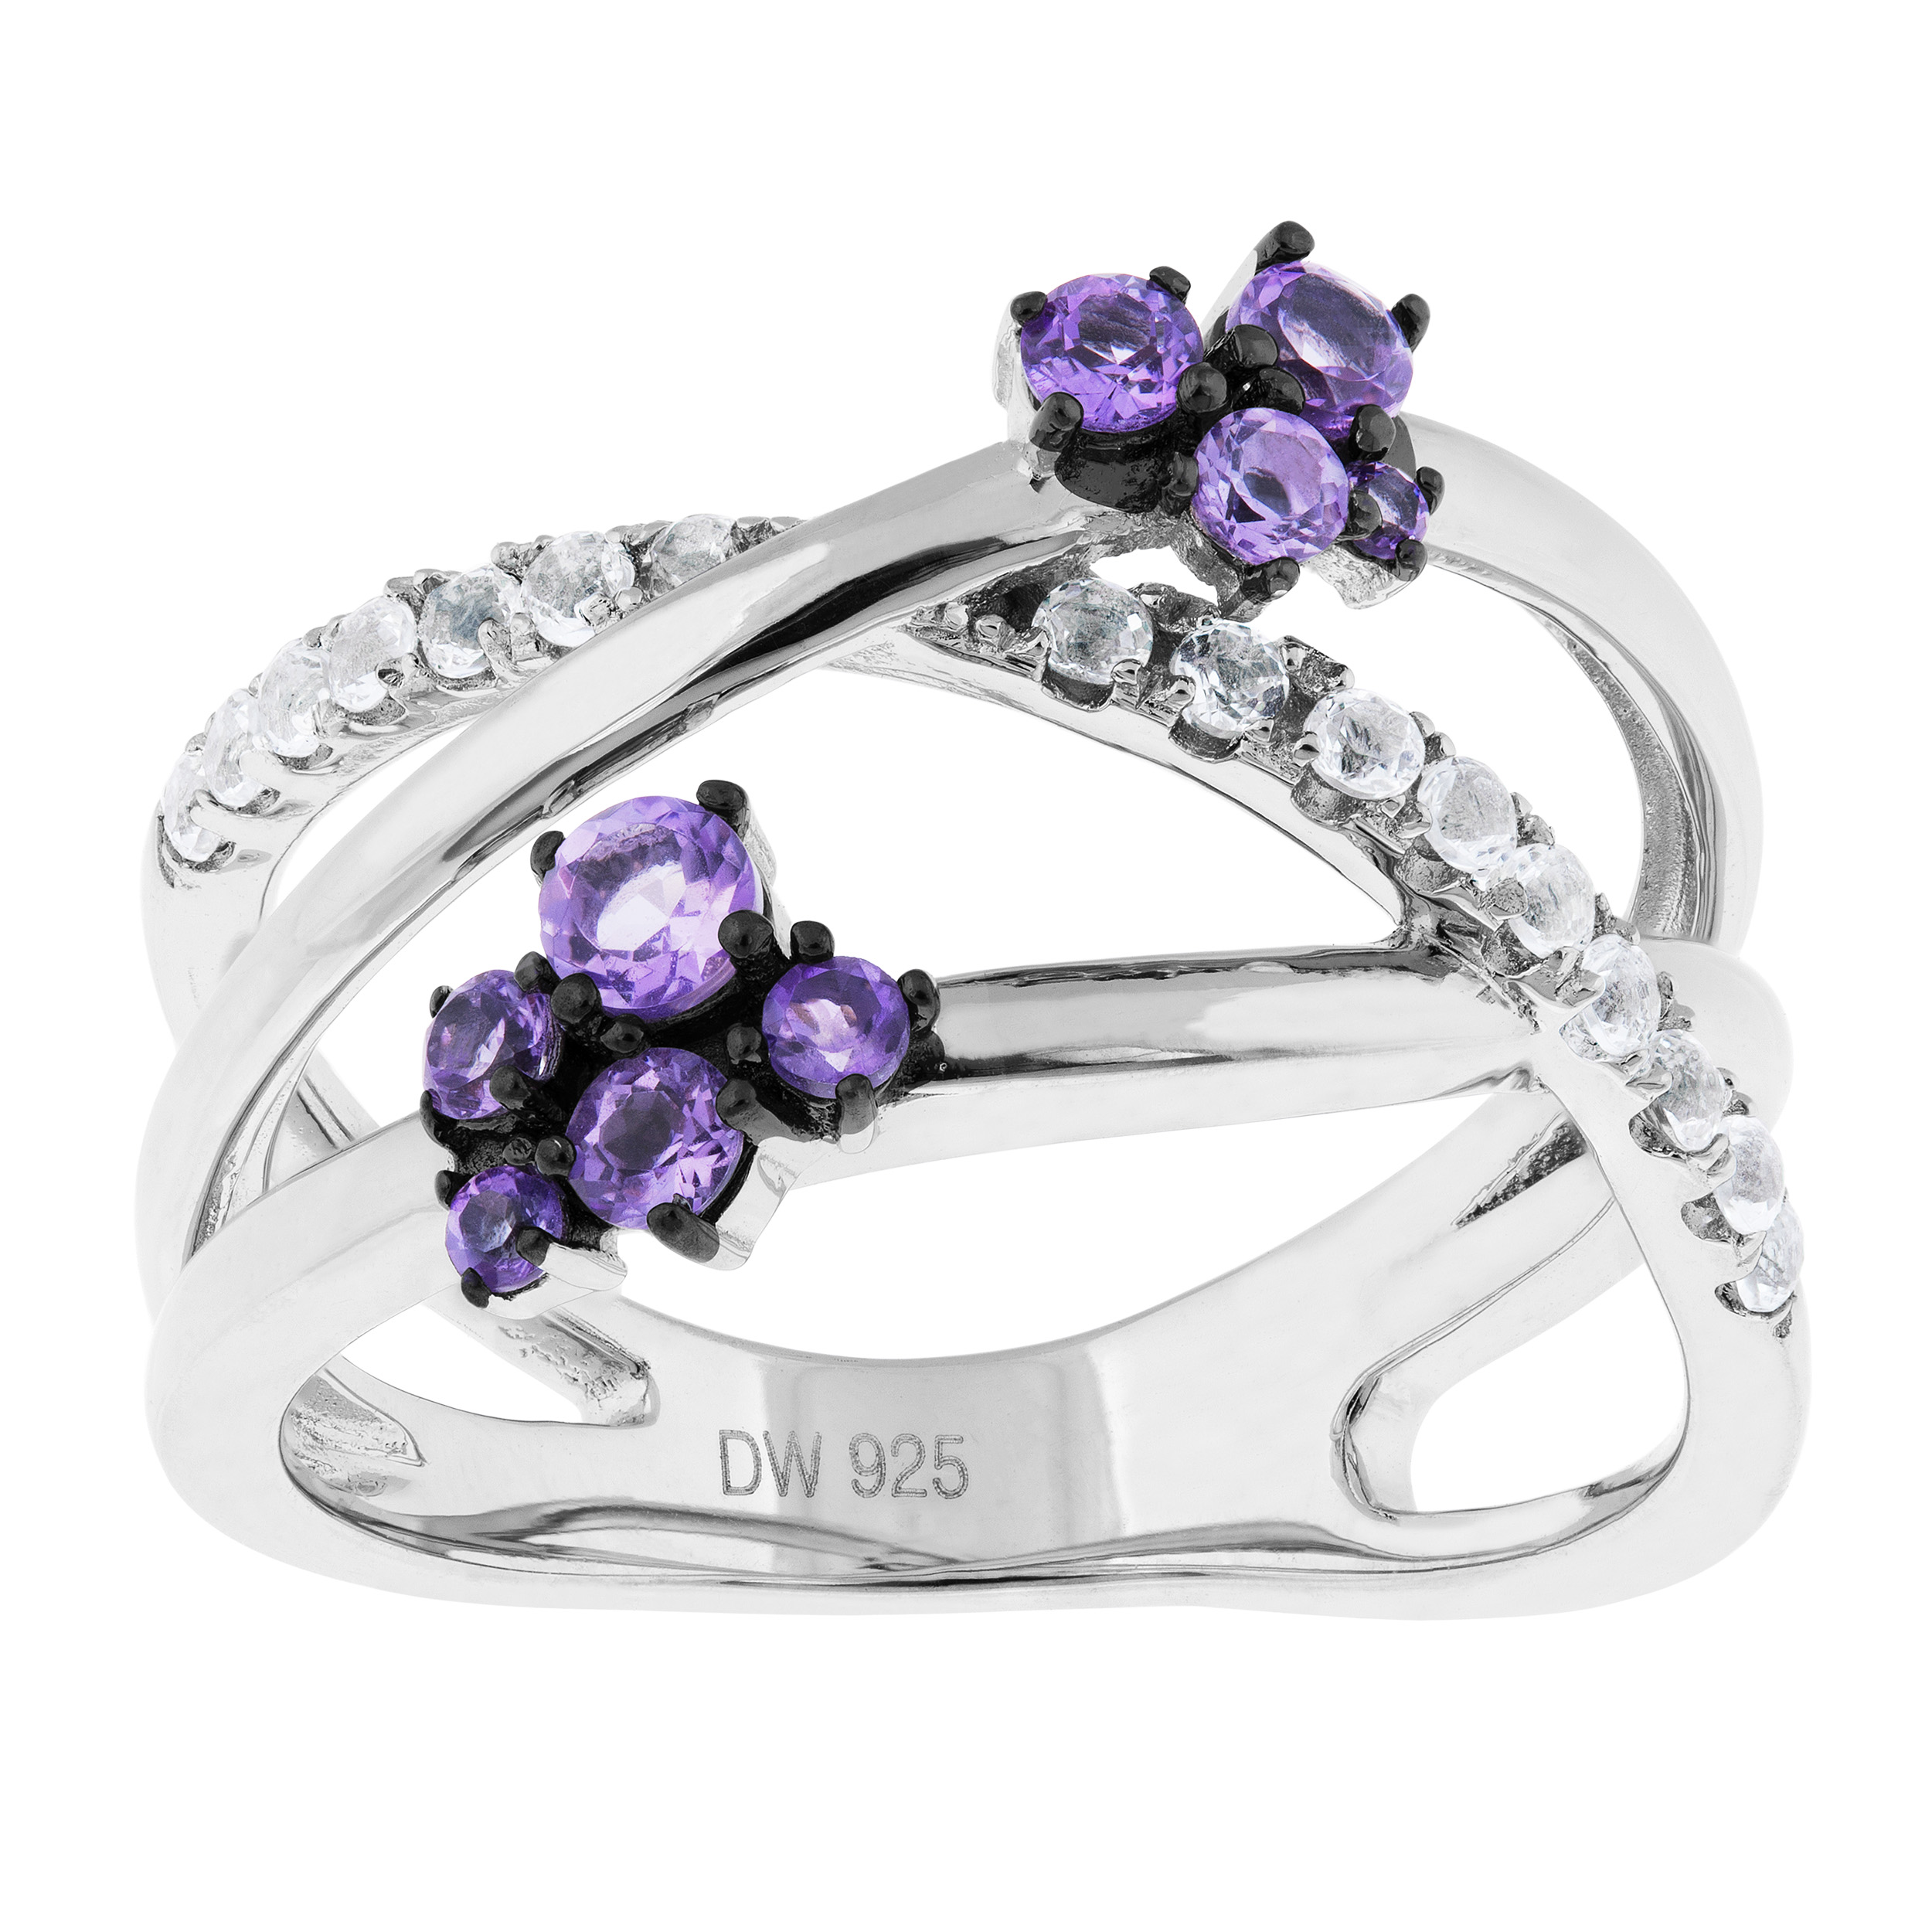 Brazillian Amethyst and White Topaz Ring, Rhodium Plated Sterling Silver